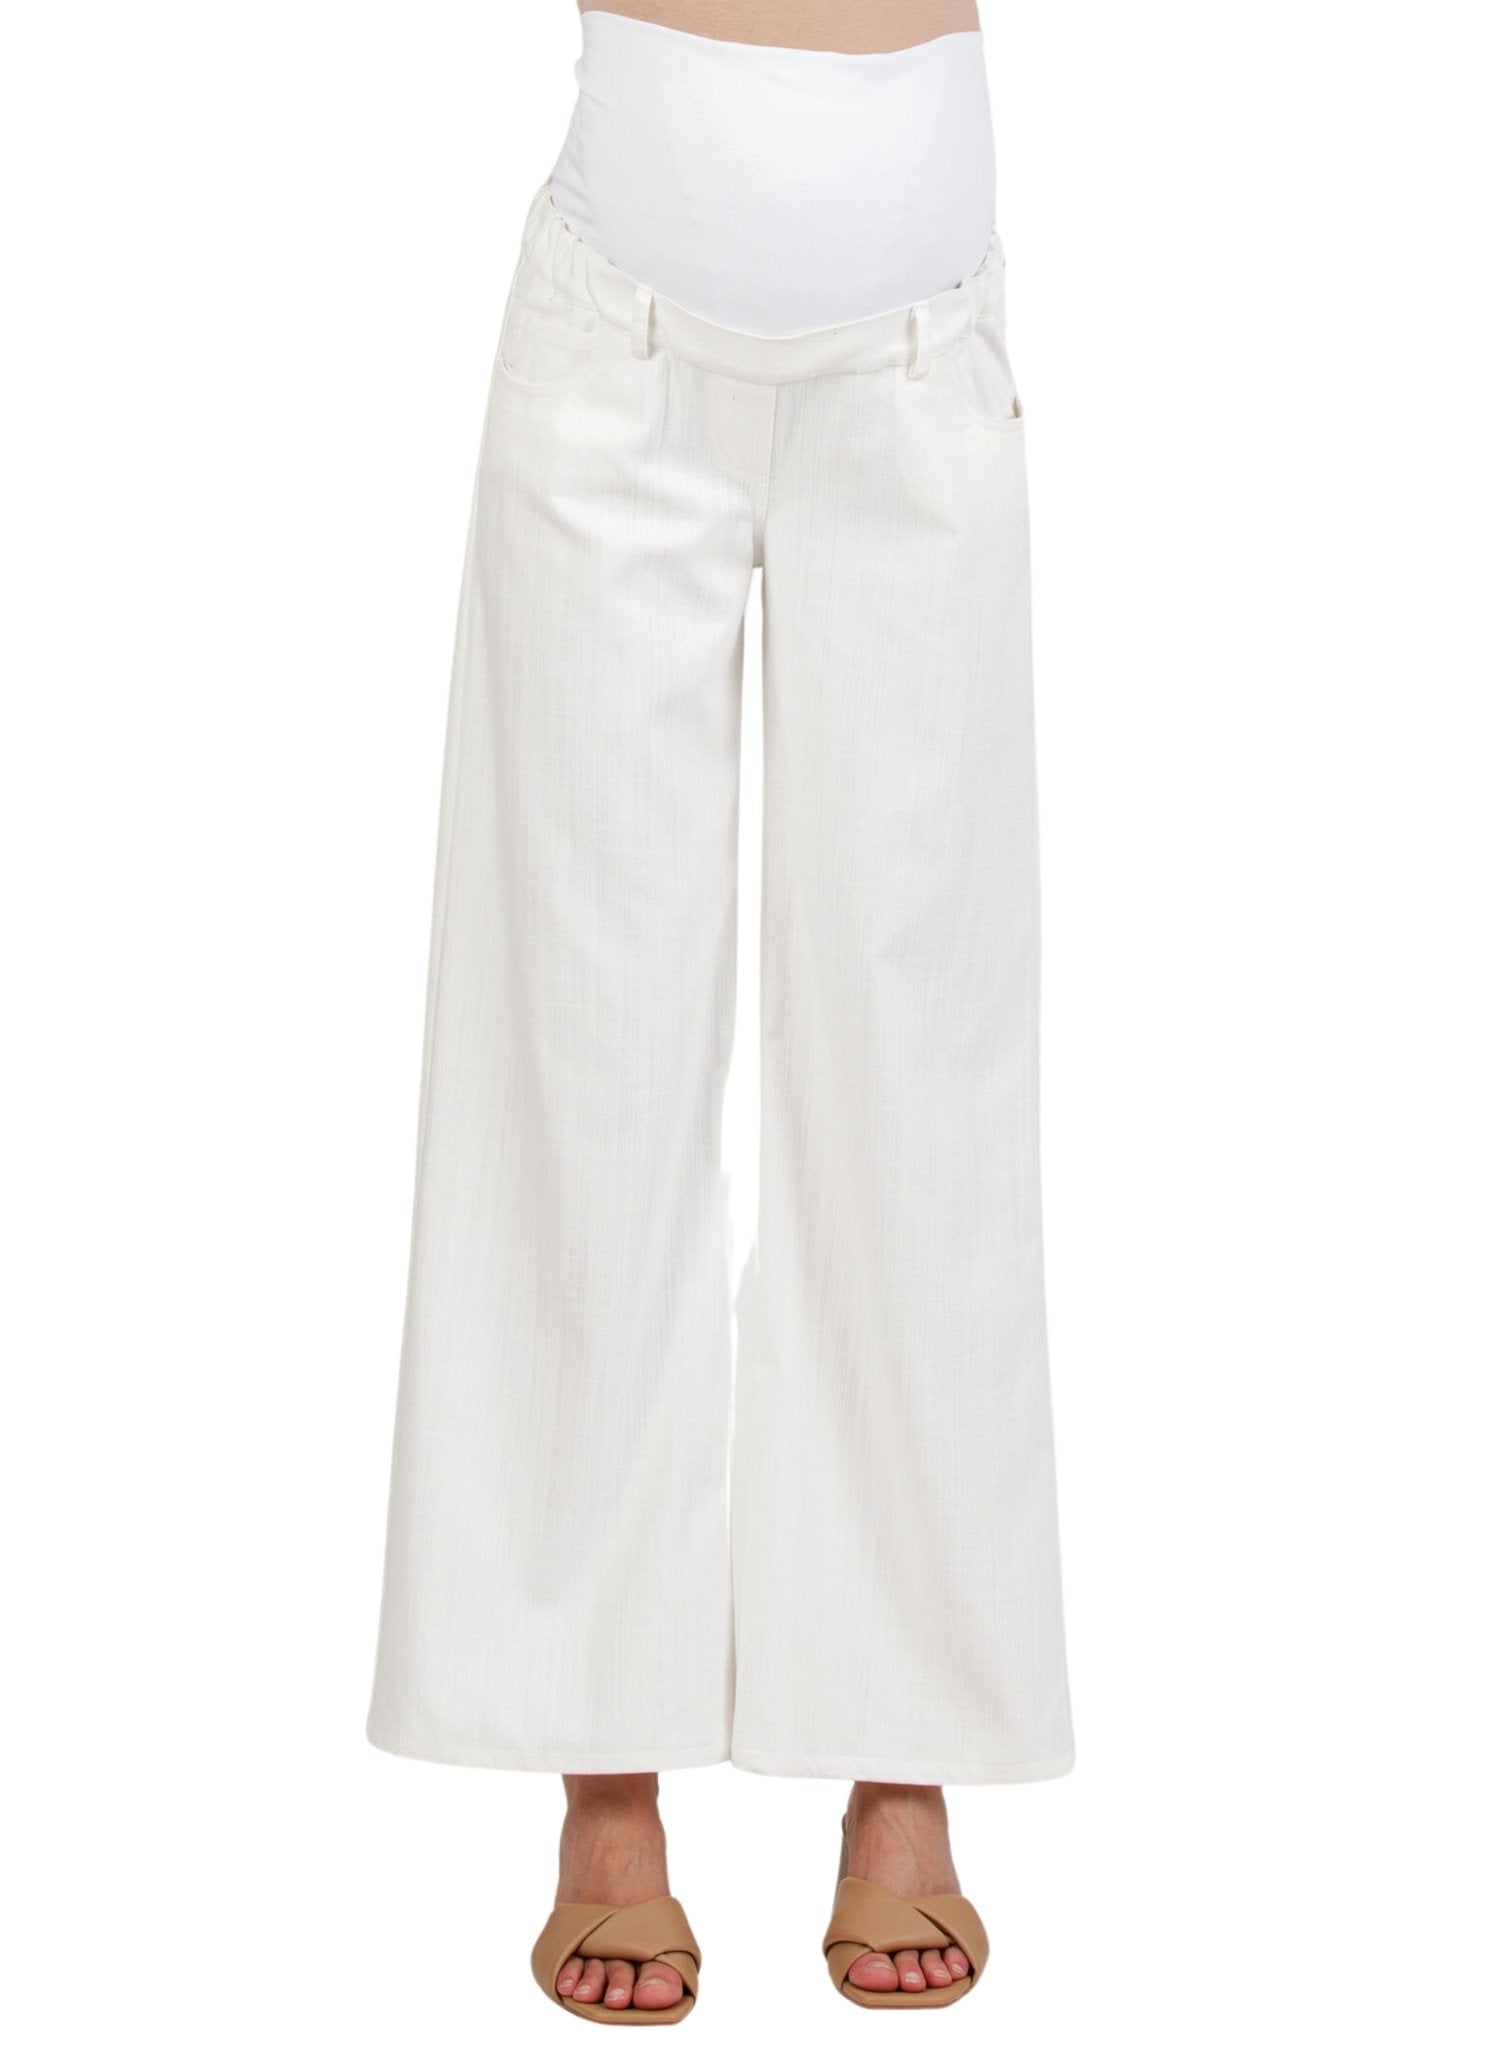 Palazzo Maternity Jeans - Mums and Bumps